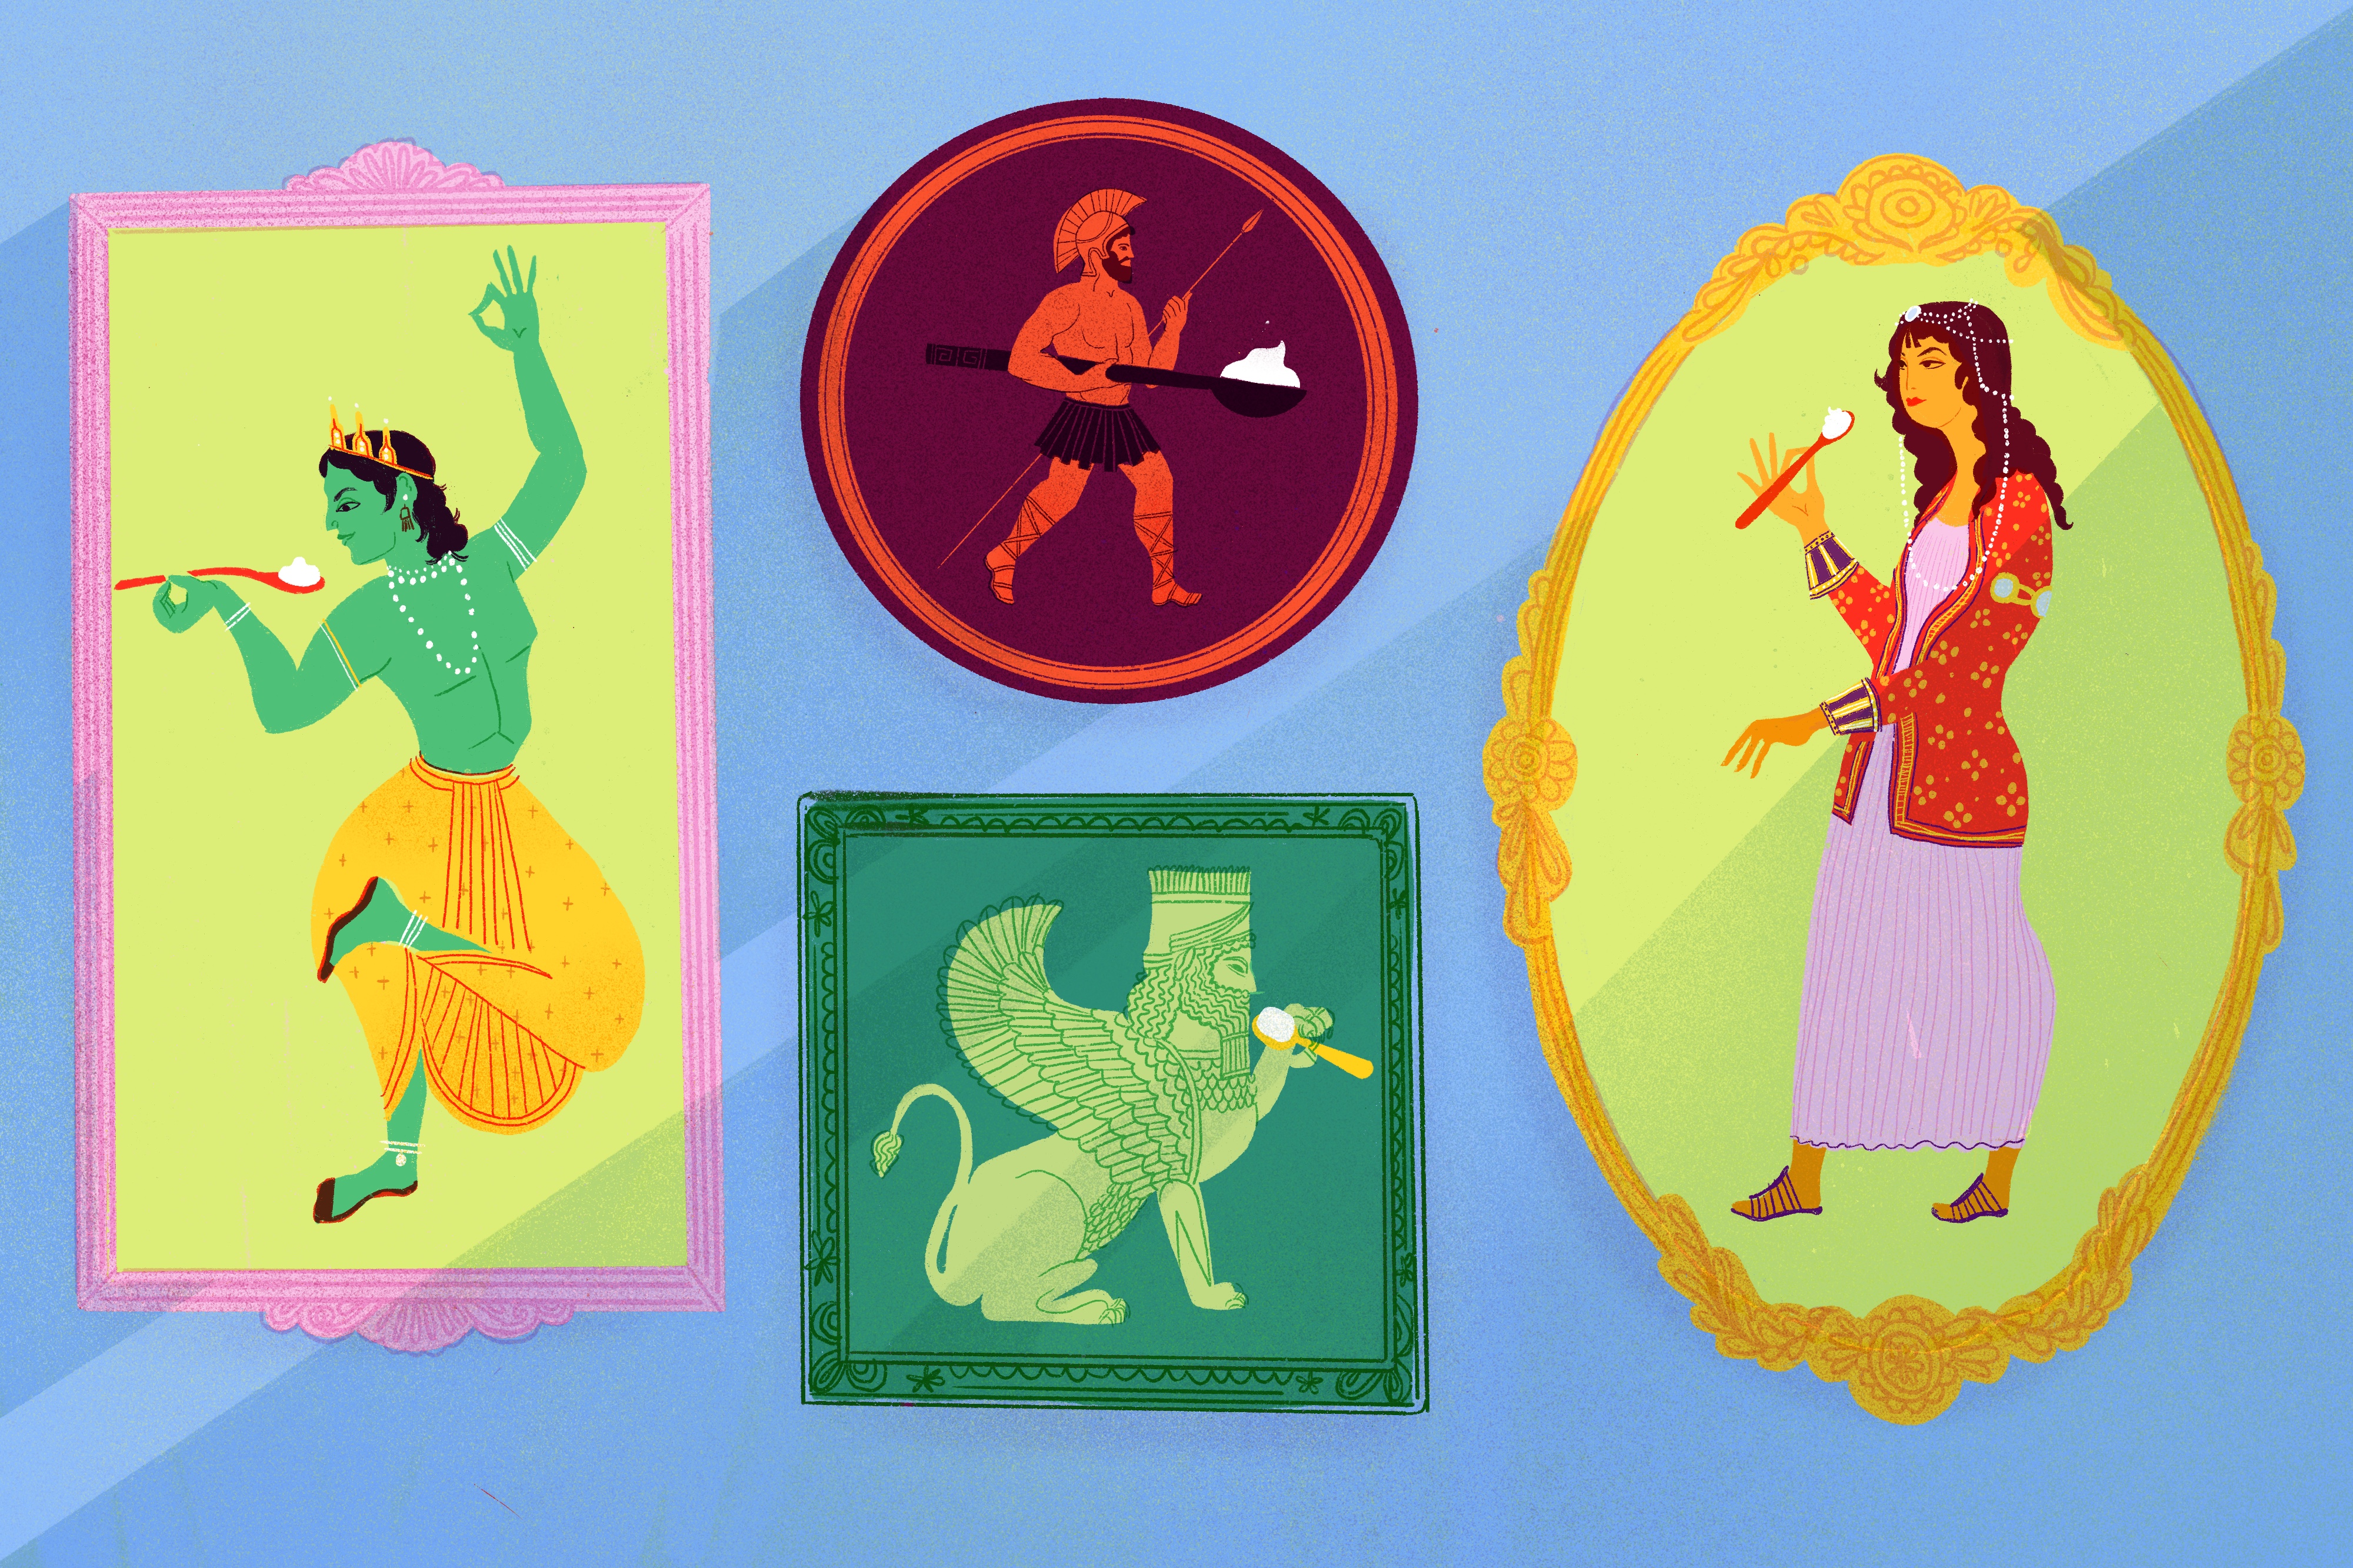 Portraits of figures in ancient India, Greece, Persia and the Middle East eating yogurt. Illustration.